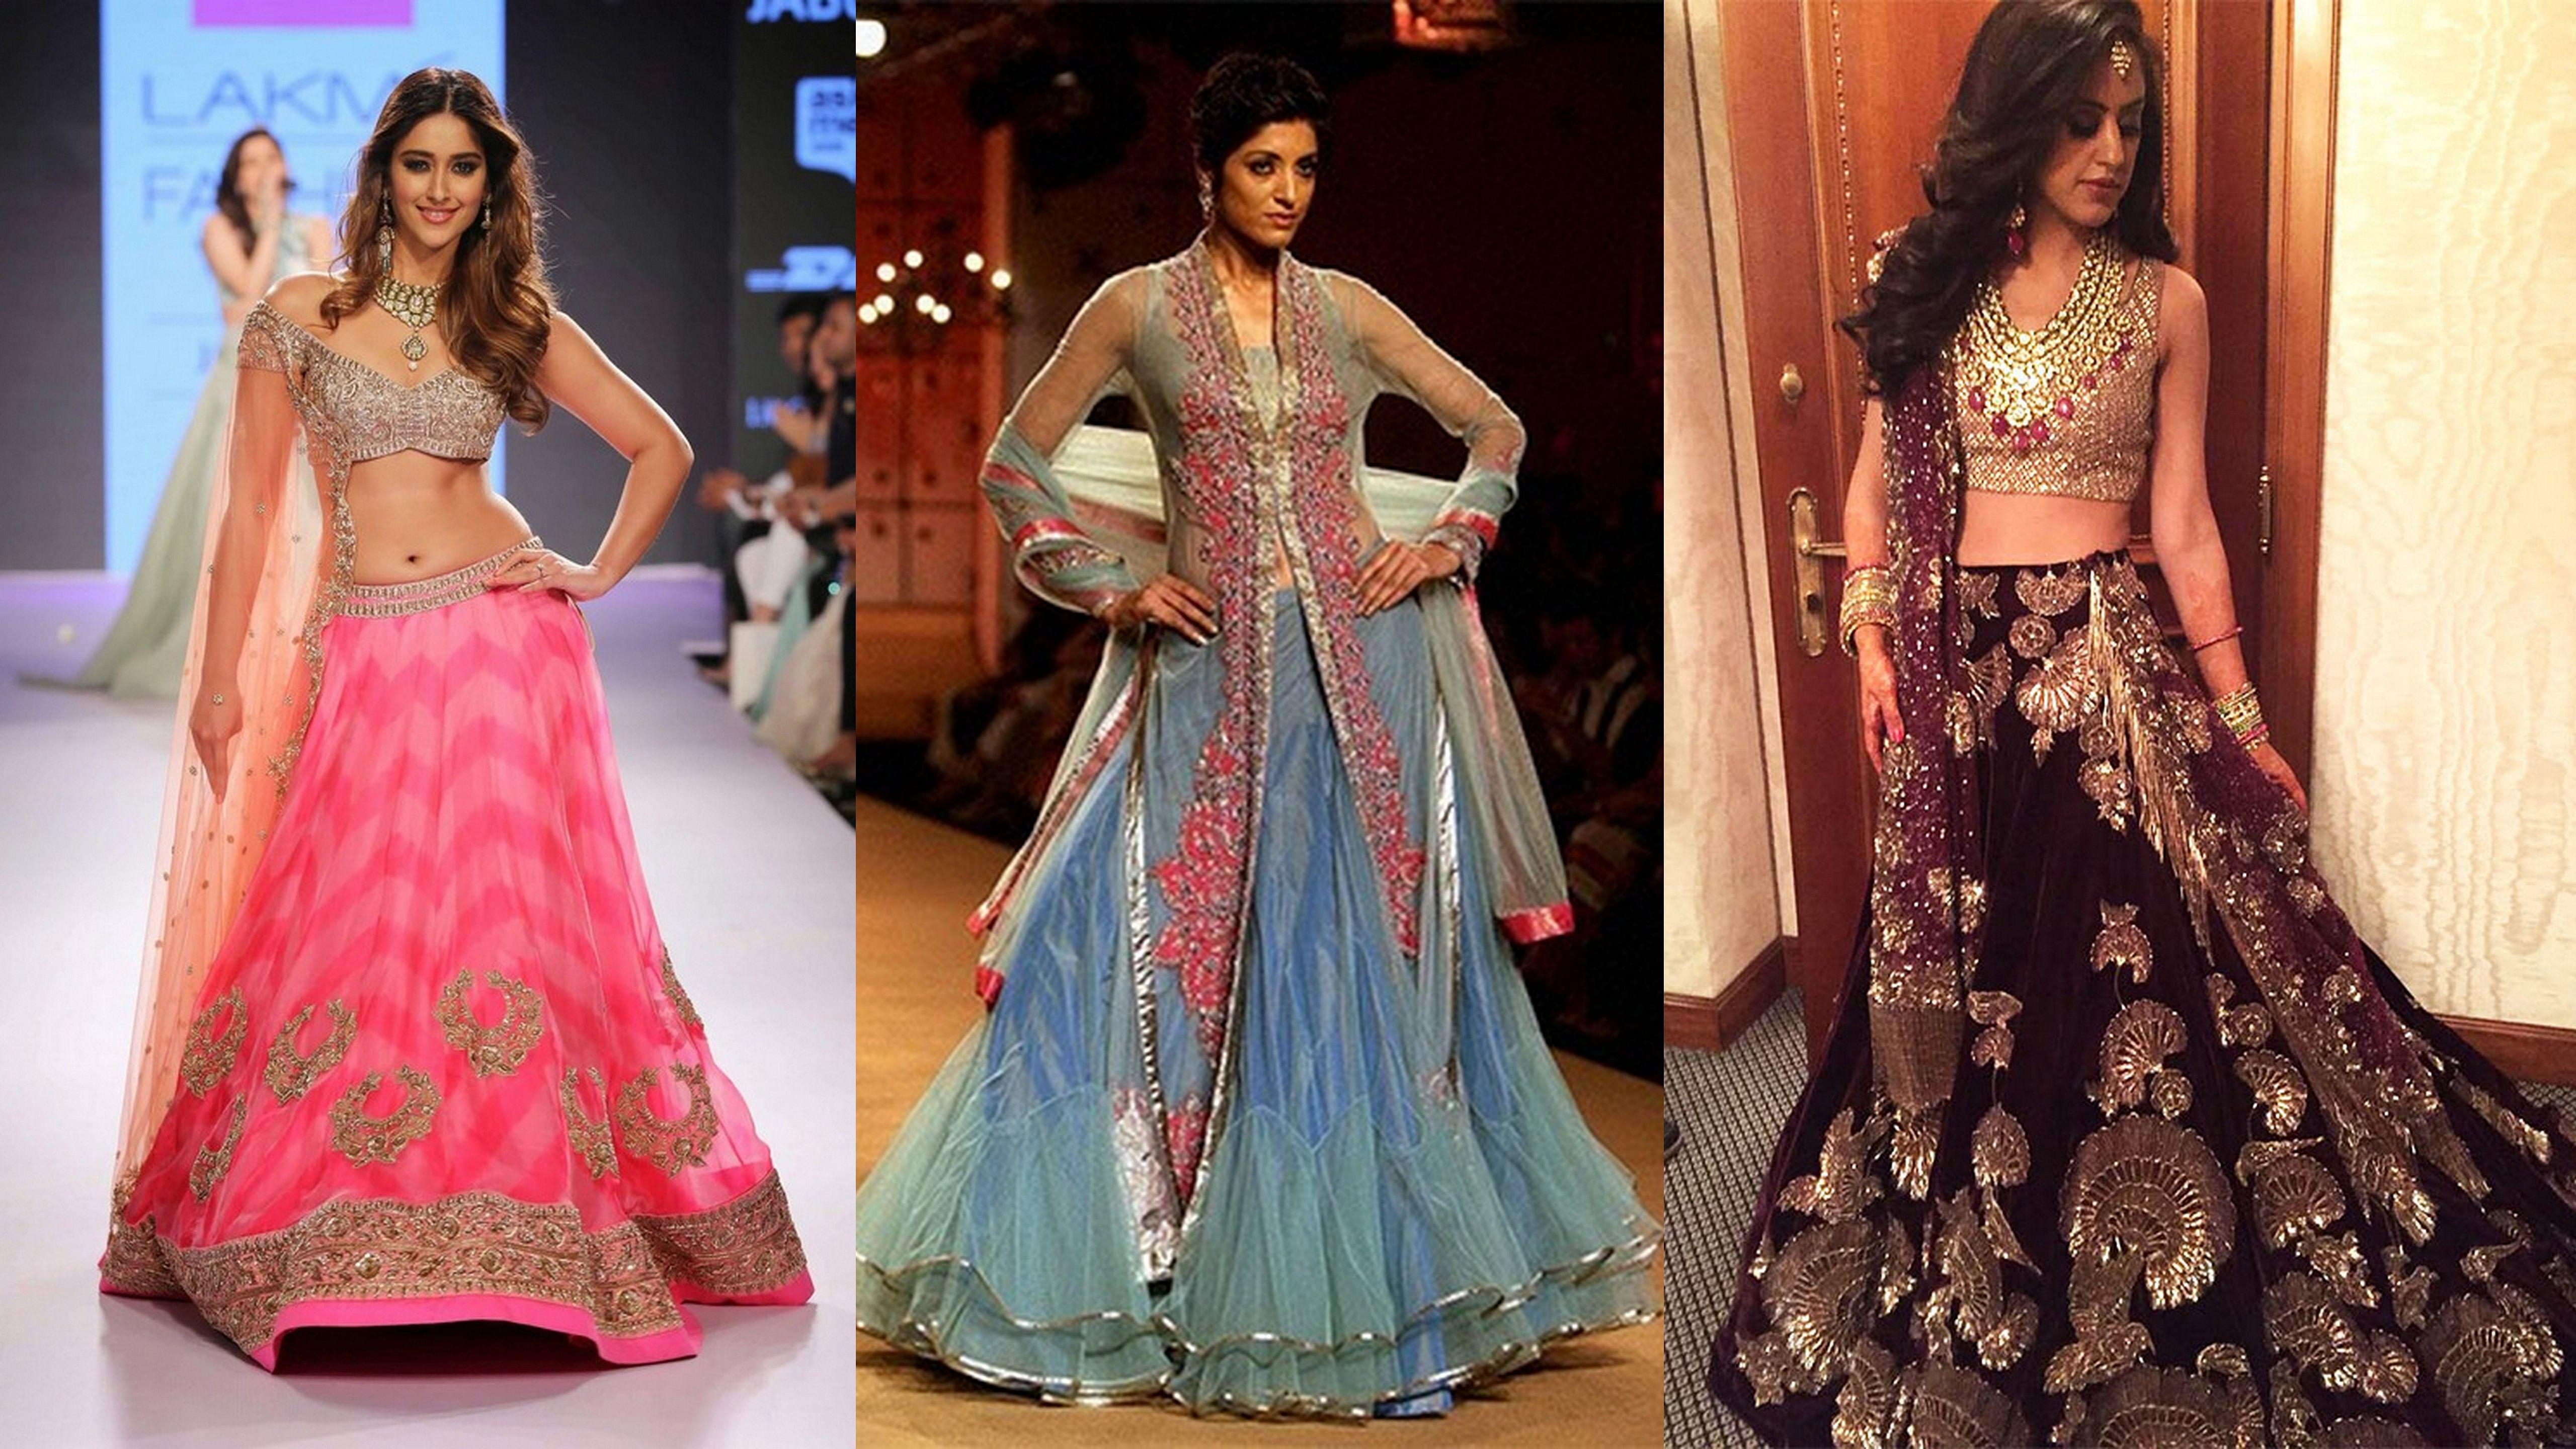 7 WAYS TO RECYCLE YOUR OLD LEHENGA FOR THE PERFECT RAKSHABANDHAN LOOK